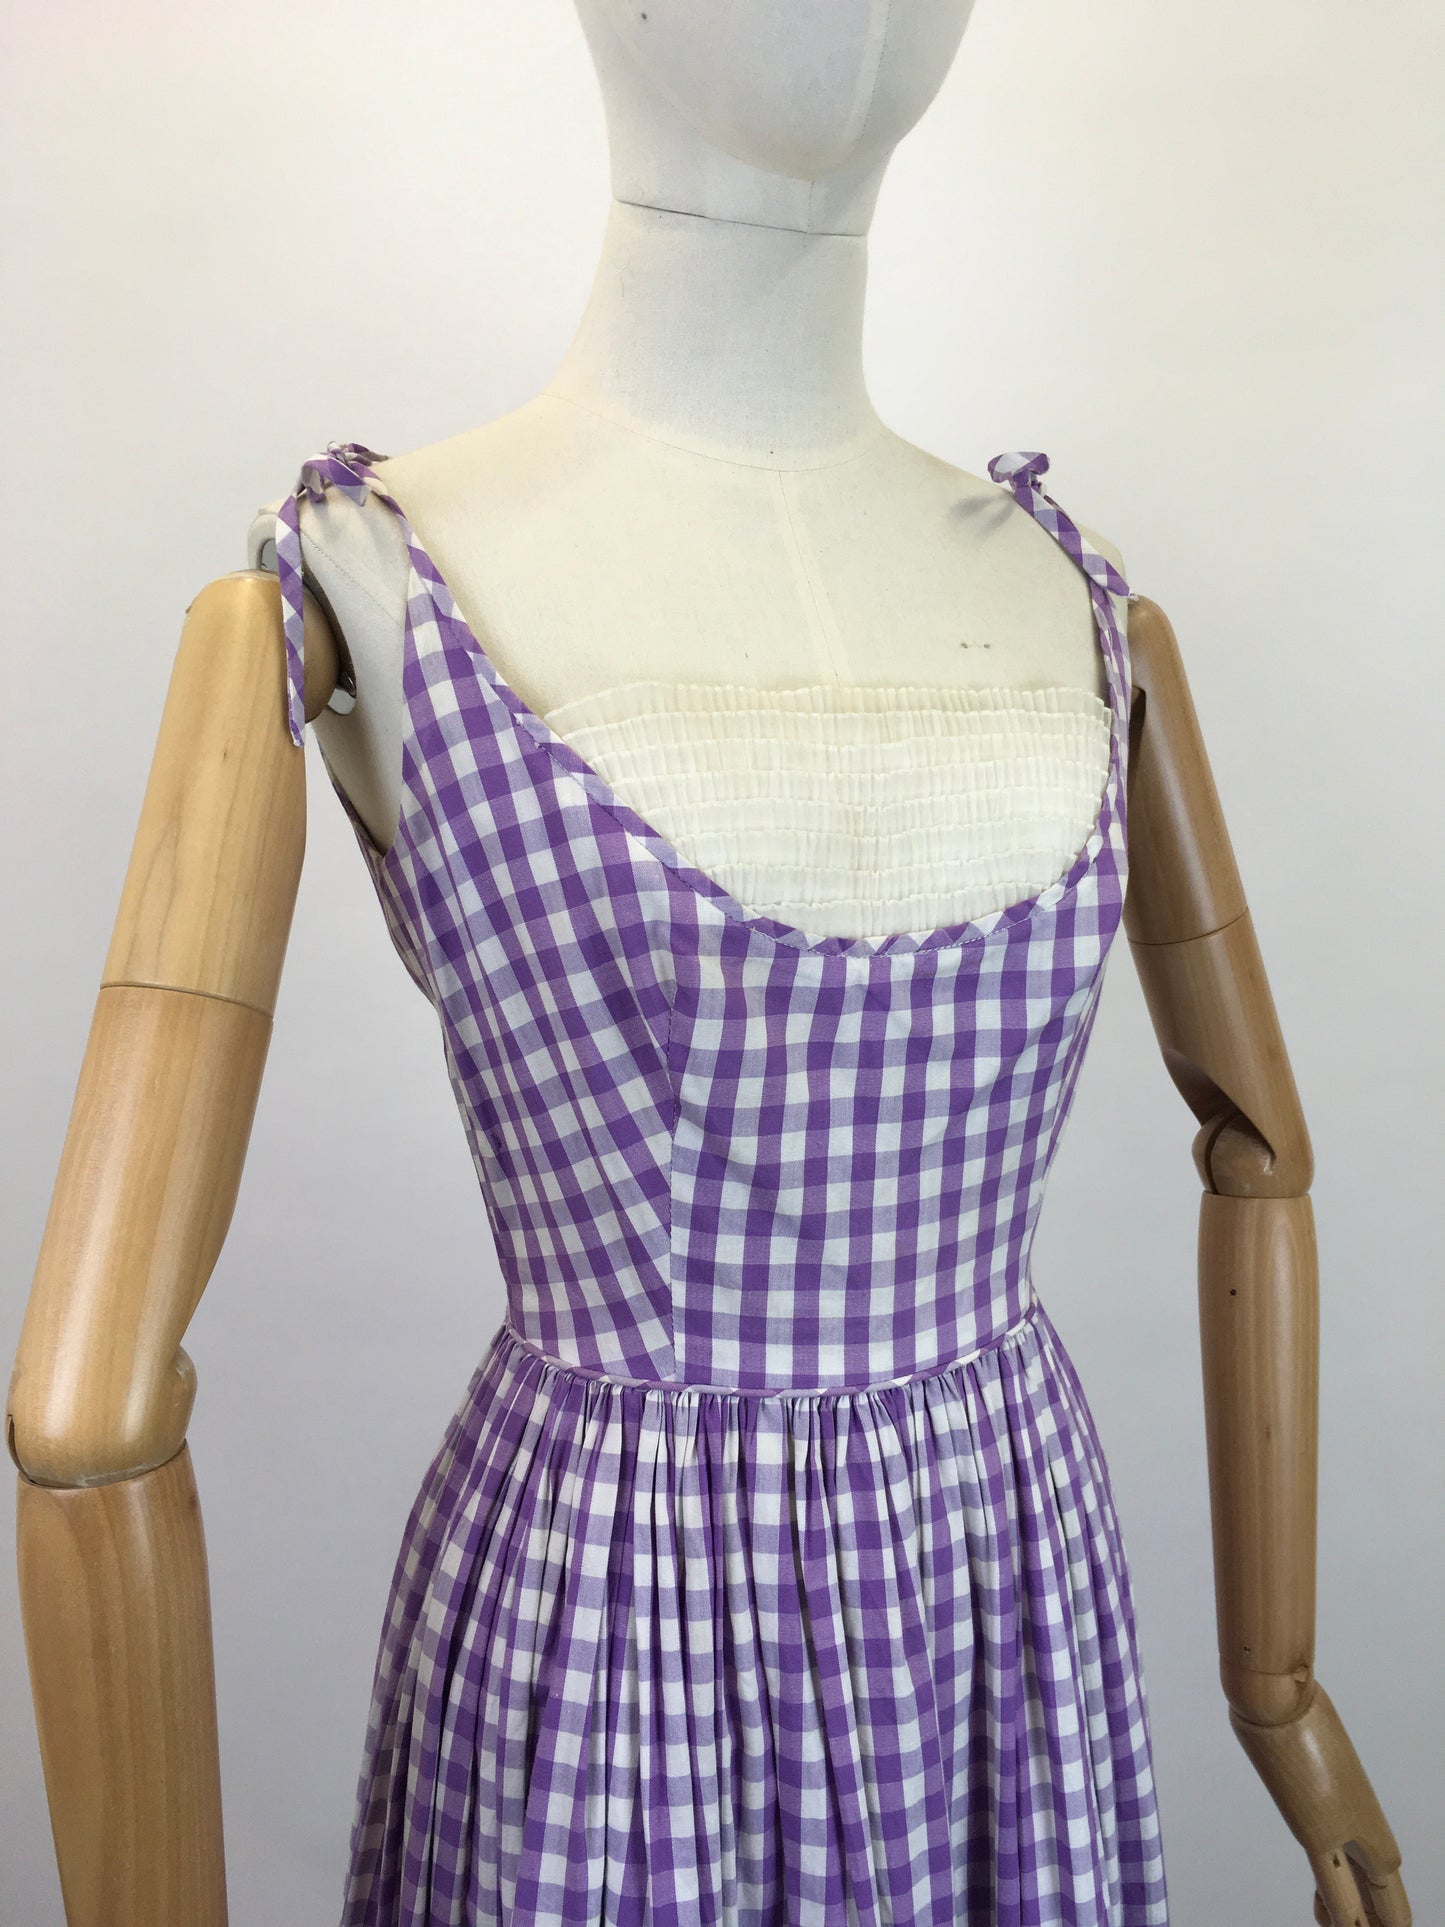 Original 1950's Darling ' Sambo Fashions' Frock - In A Beautiful Purple and White Gingham